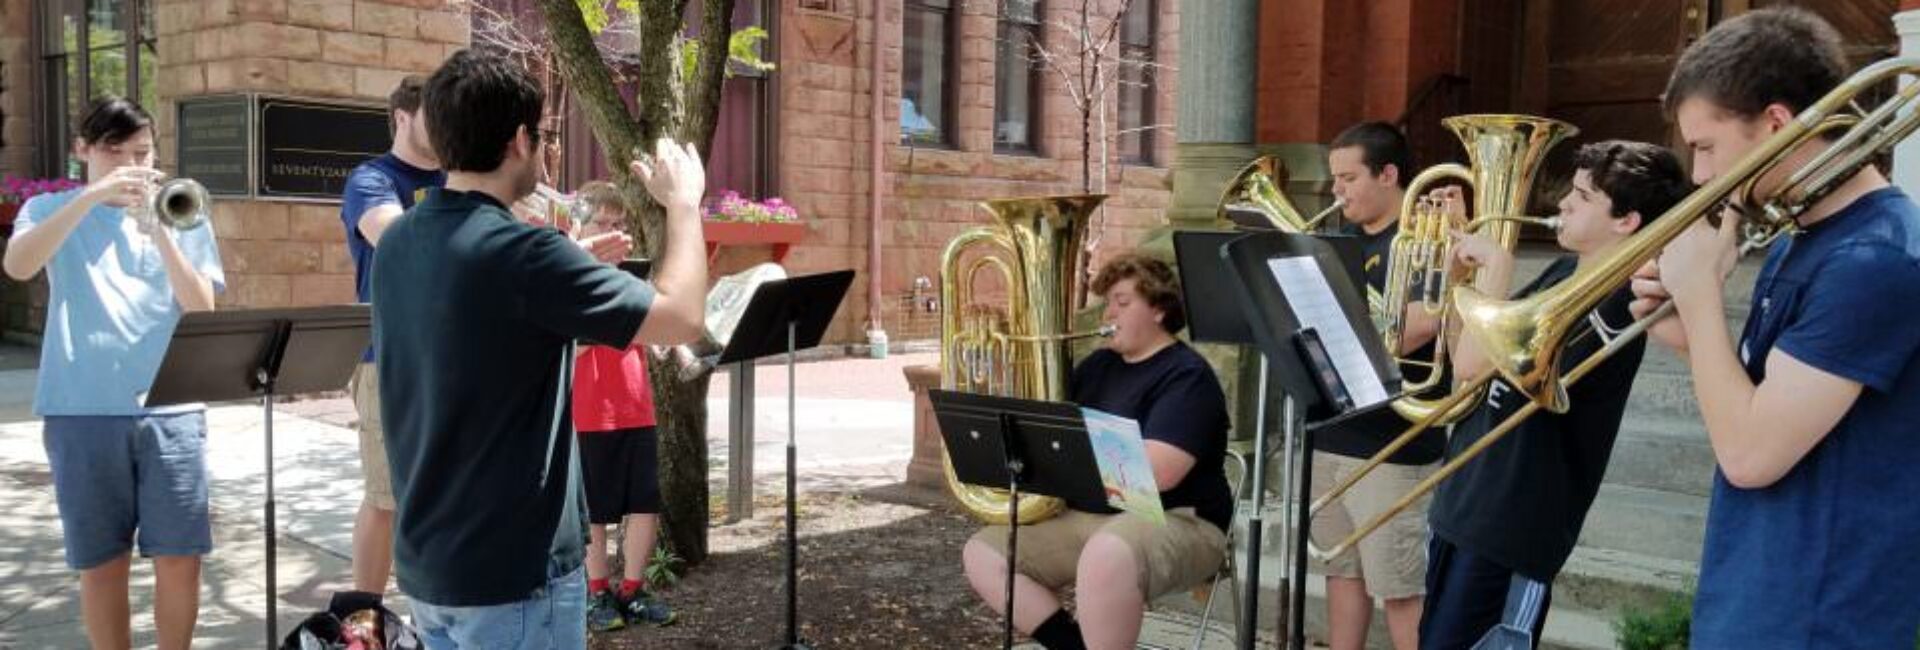 Summer-Bands-2018-Brass-Sectional-OUTSIDE-960x480